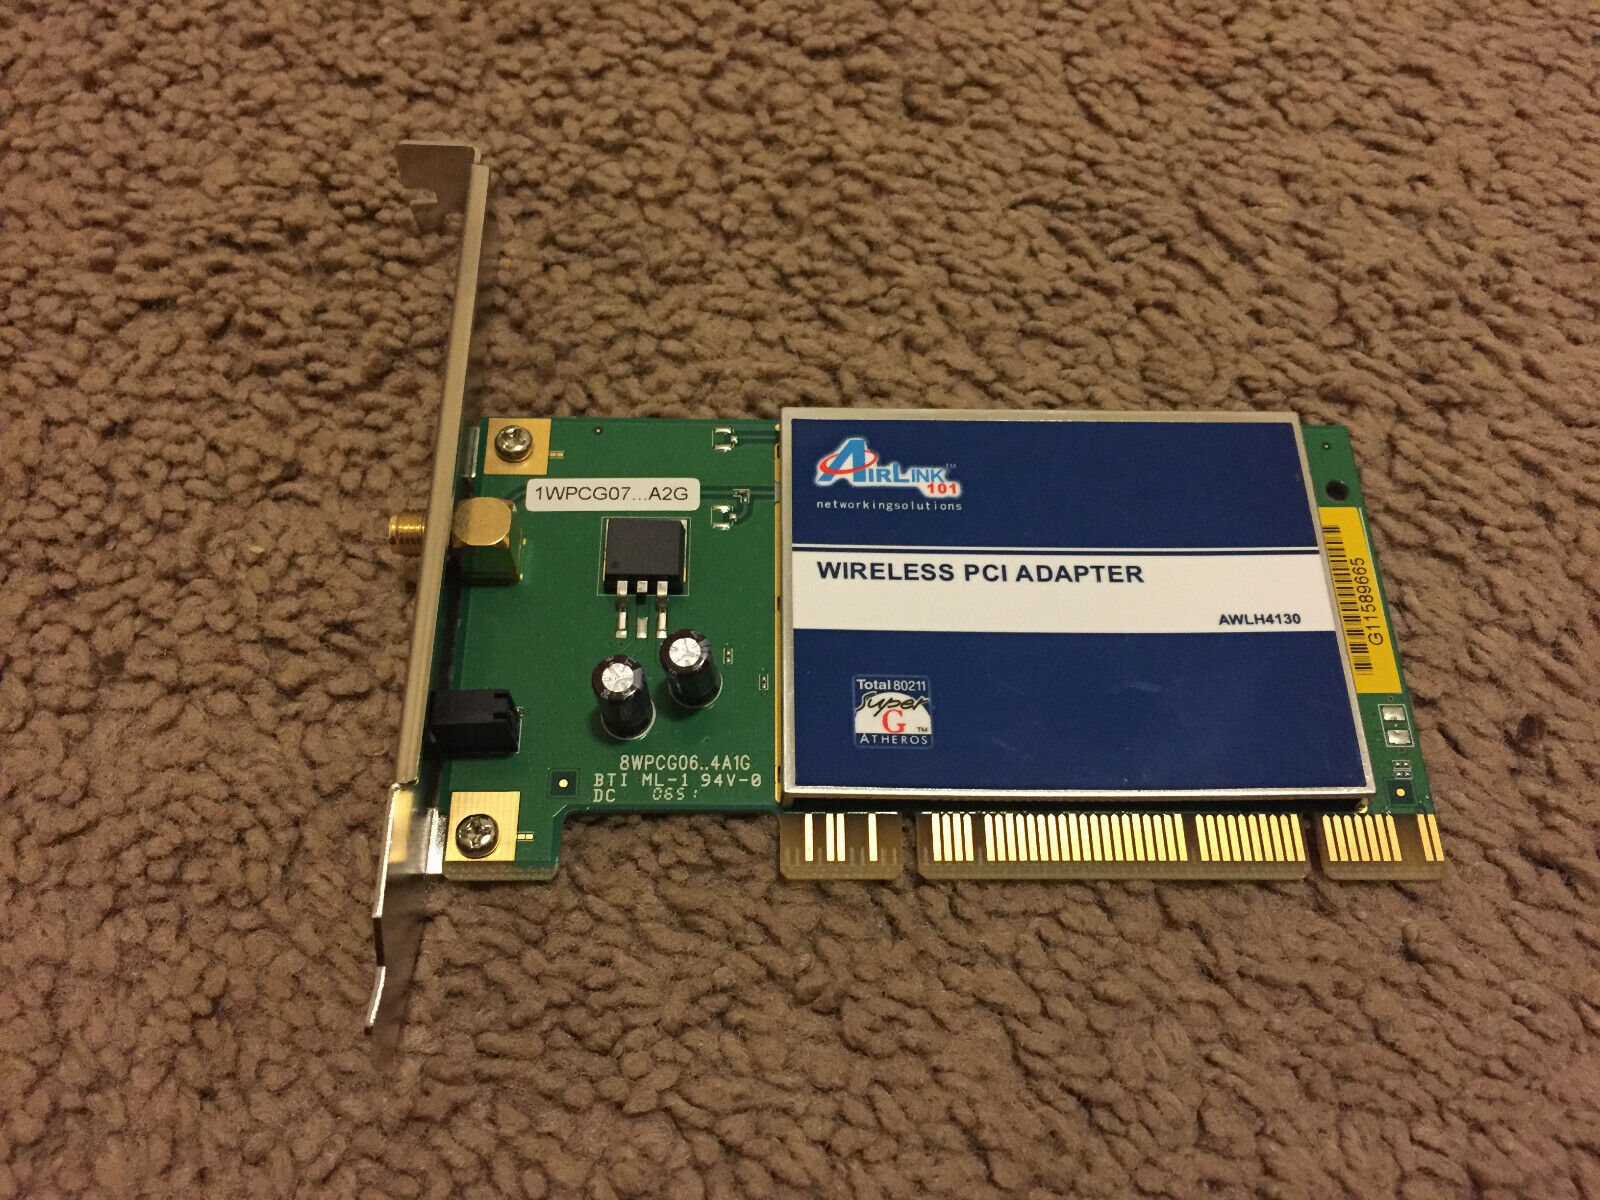 Airlink AWLH4130 Super G Wireless PCI Adapter